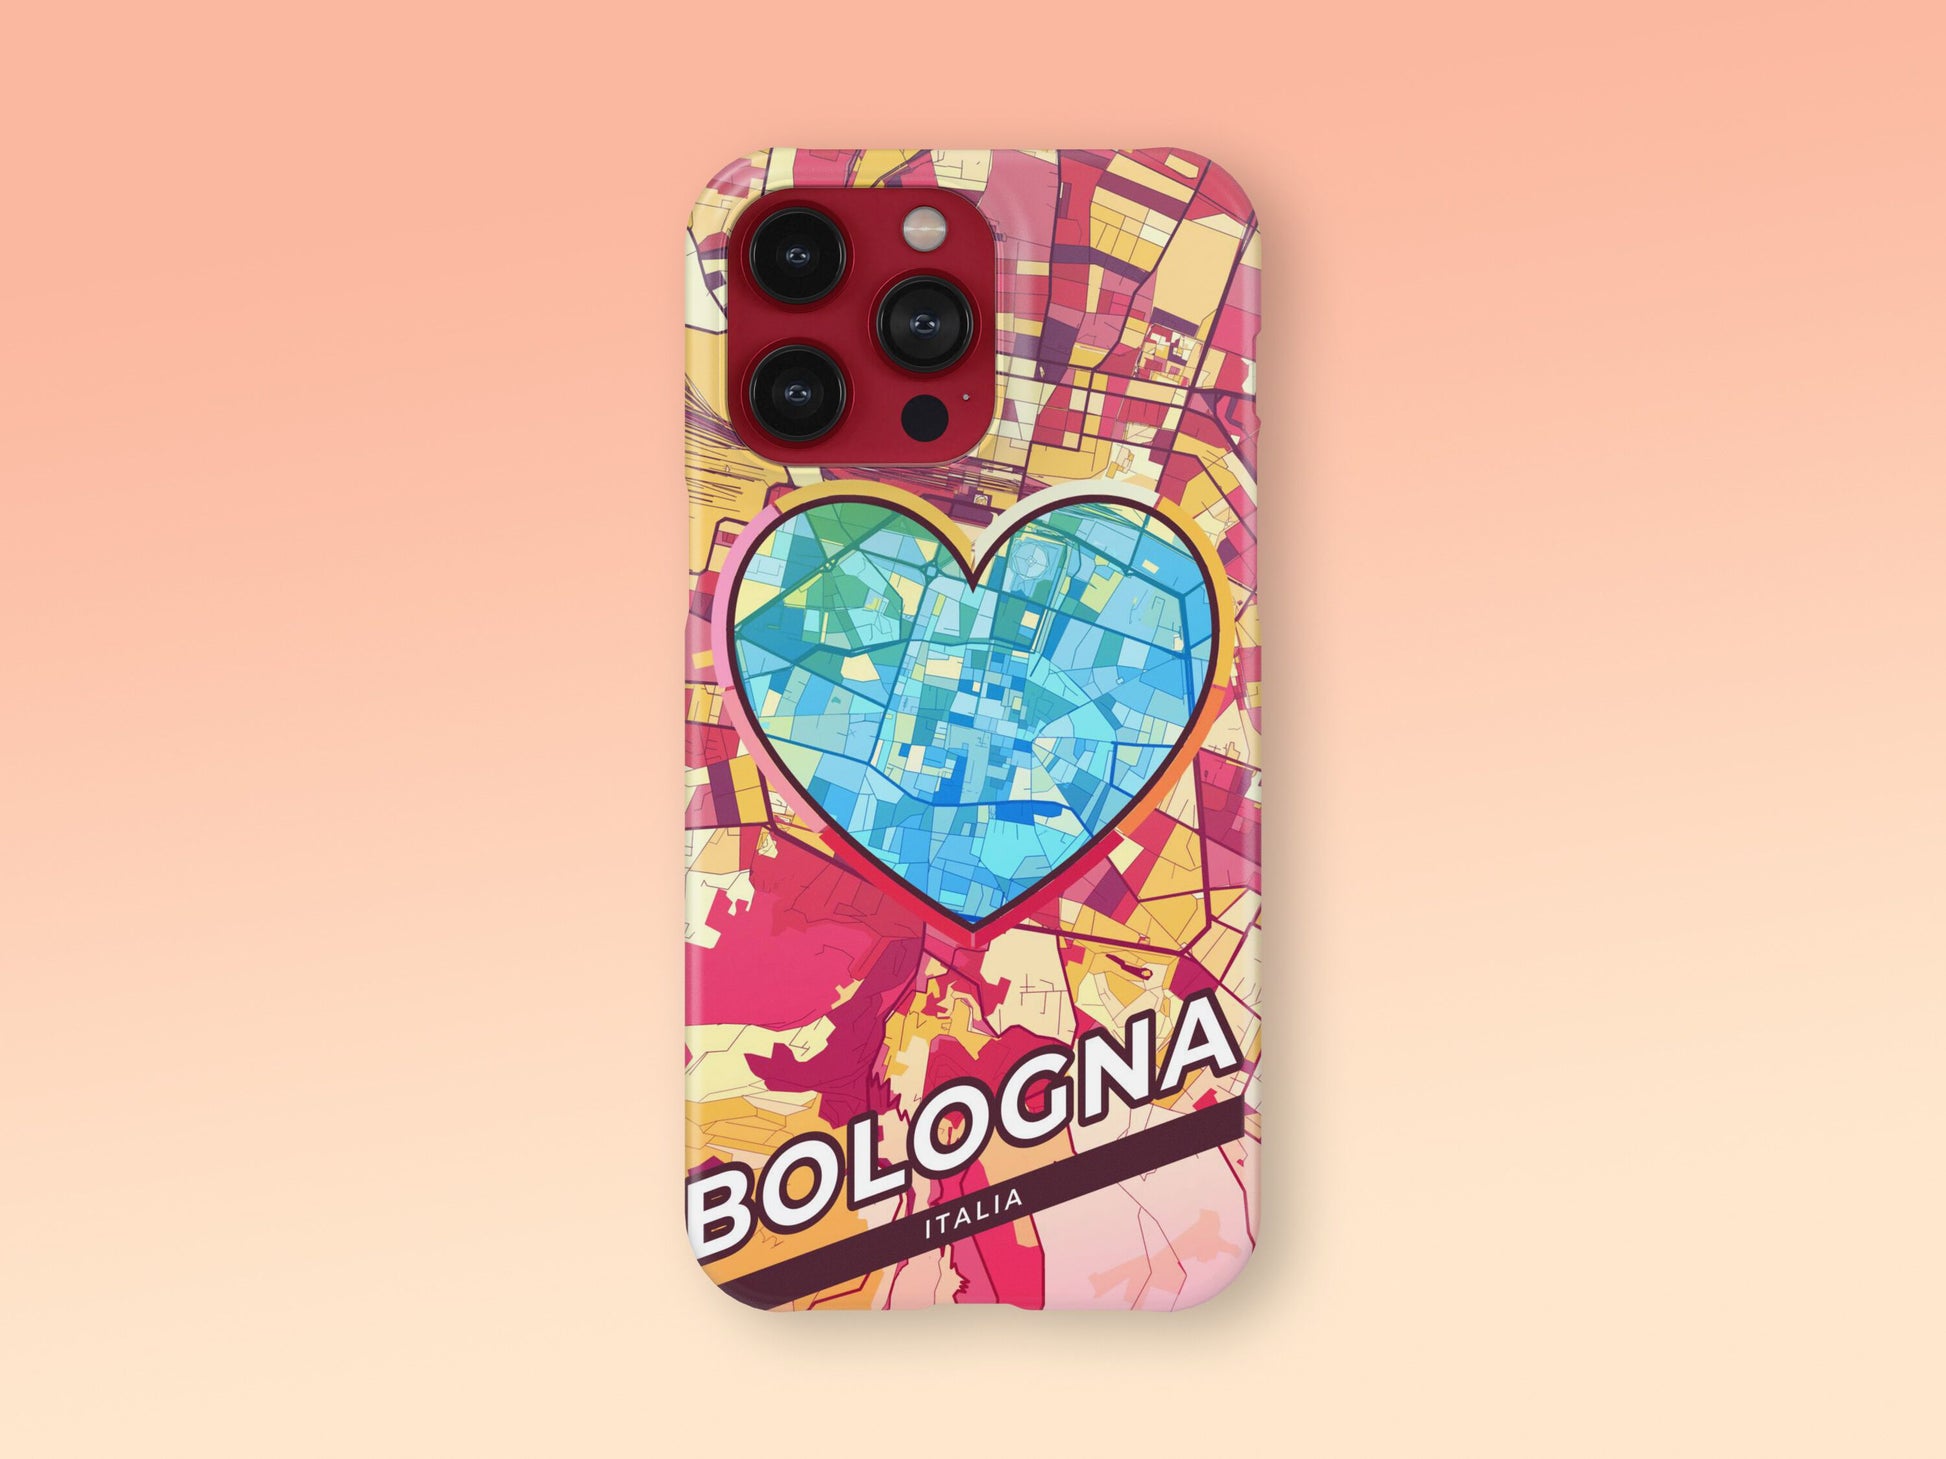 Bologna Italy slim phone case with colorful icon. Birthday, wedding or housewarming gift. Couple match cases. 2